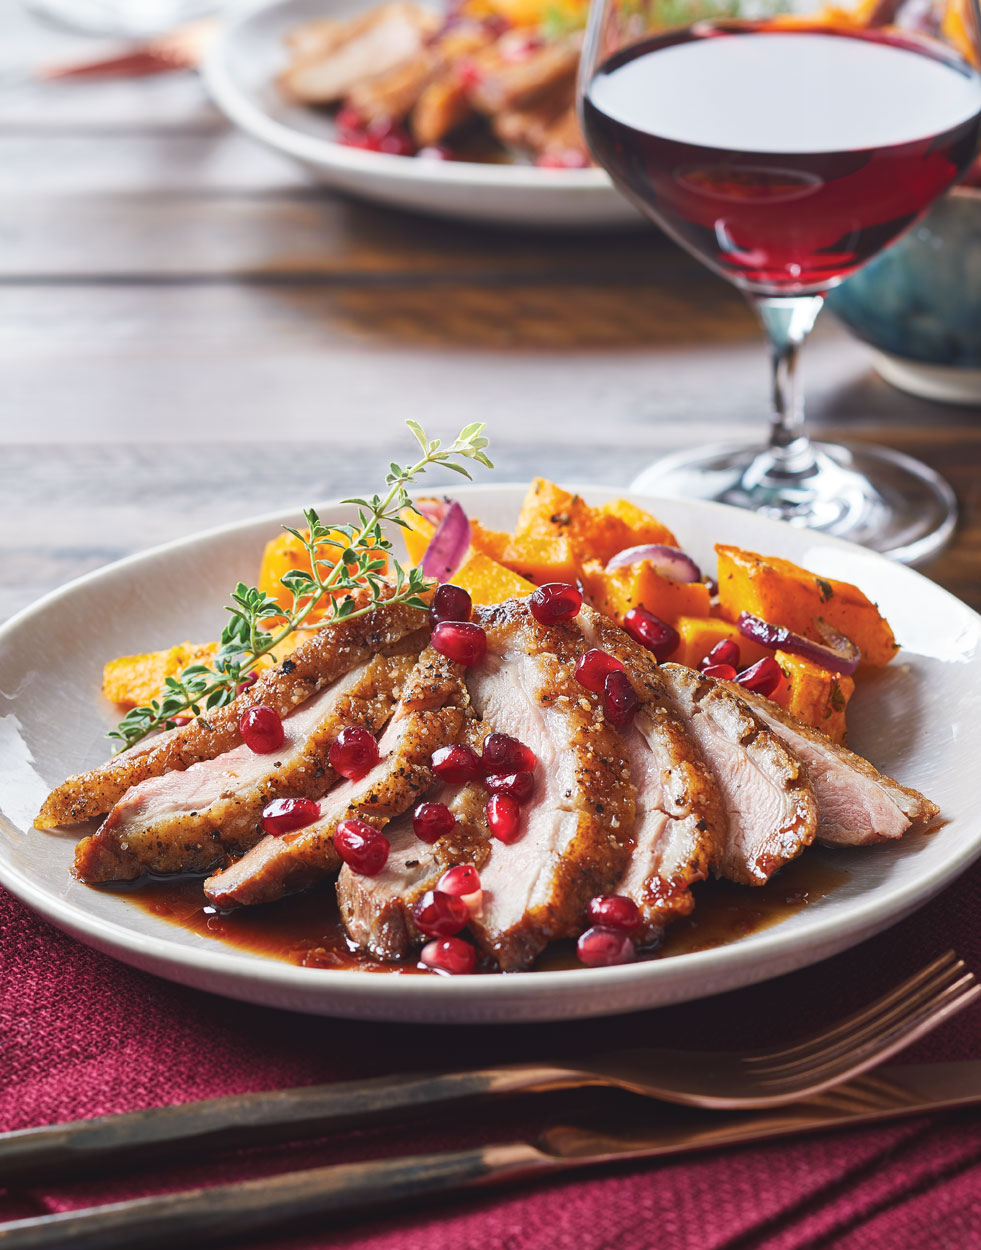 Sautéed Duck Breasts with Pomegranate Sauce